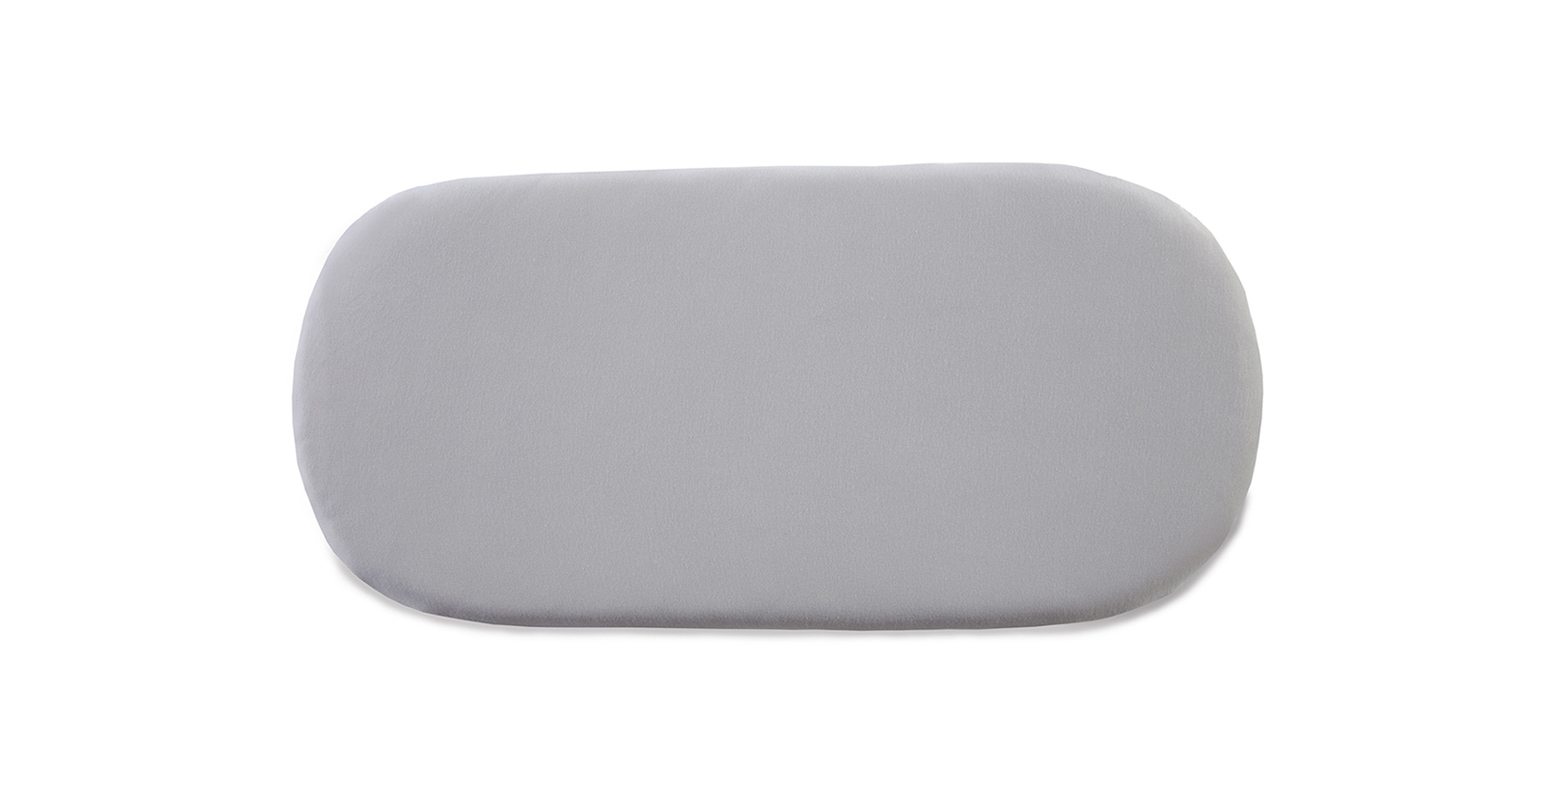 Clair De Lune Fitted Sheet Twin Pack Grey Pram